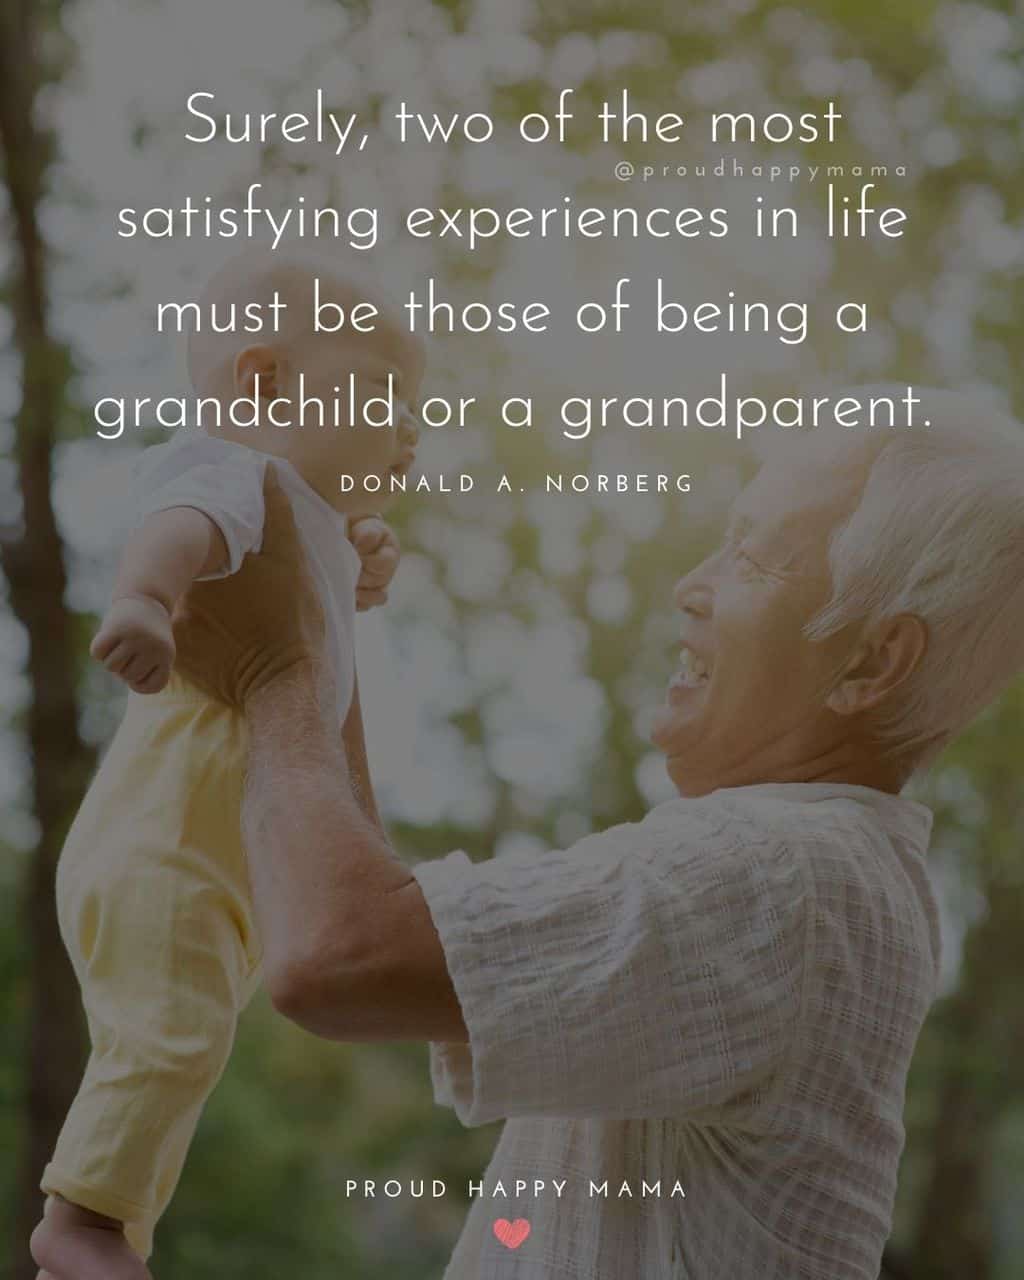 Grandparent Quotes – Surely, two of the most satisfying experiences in life must be those of being a grandchild or a